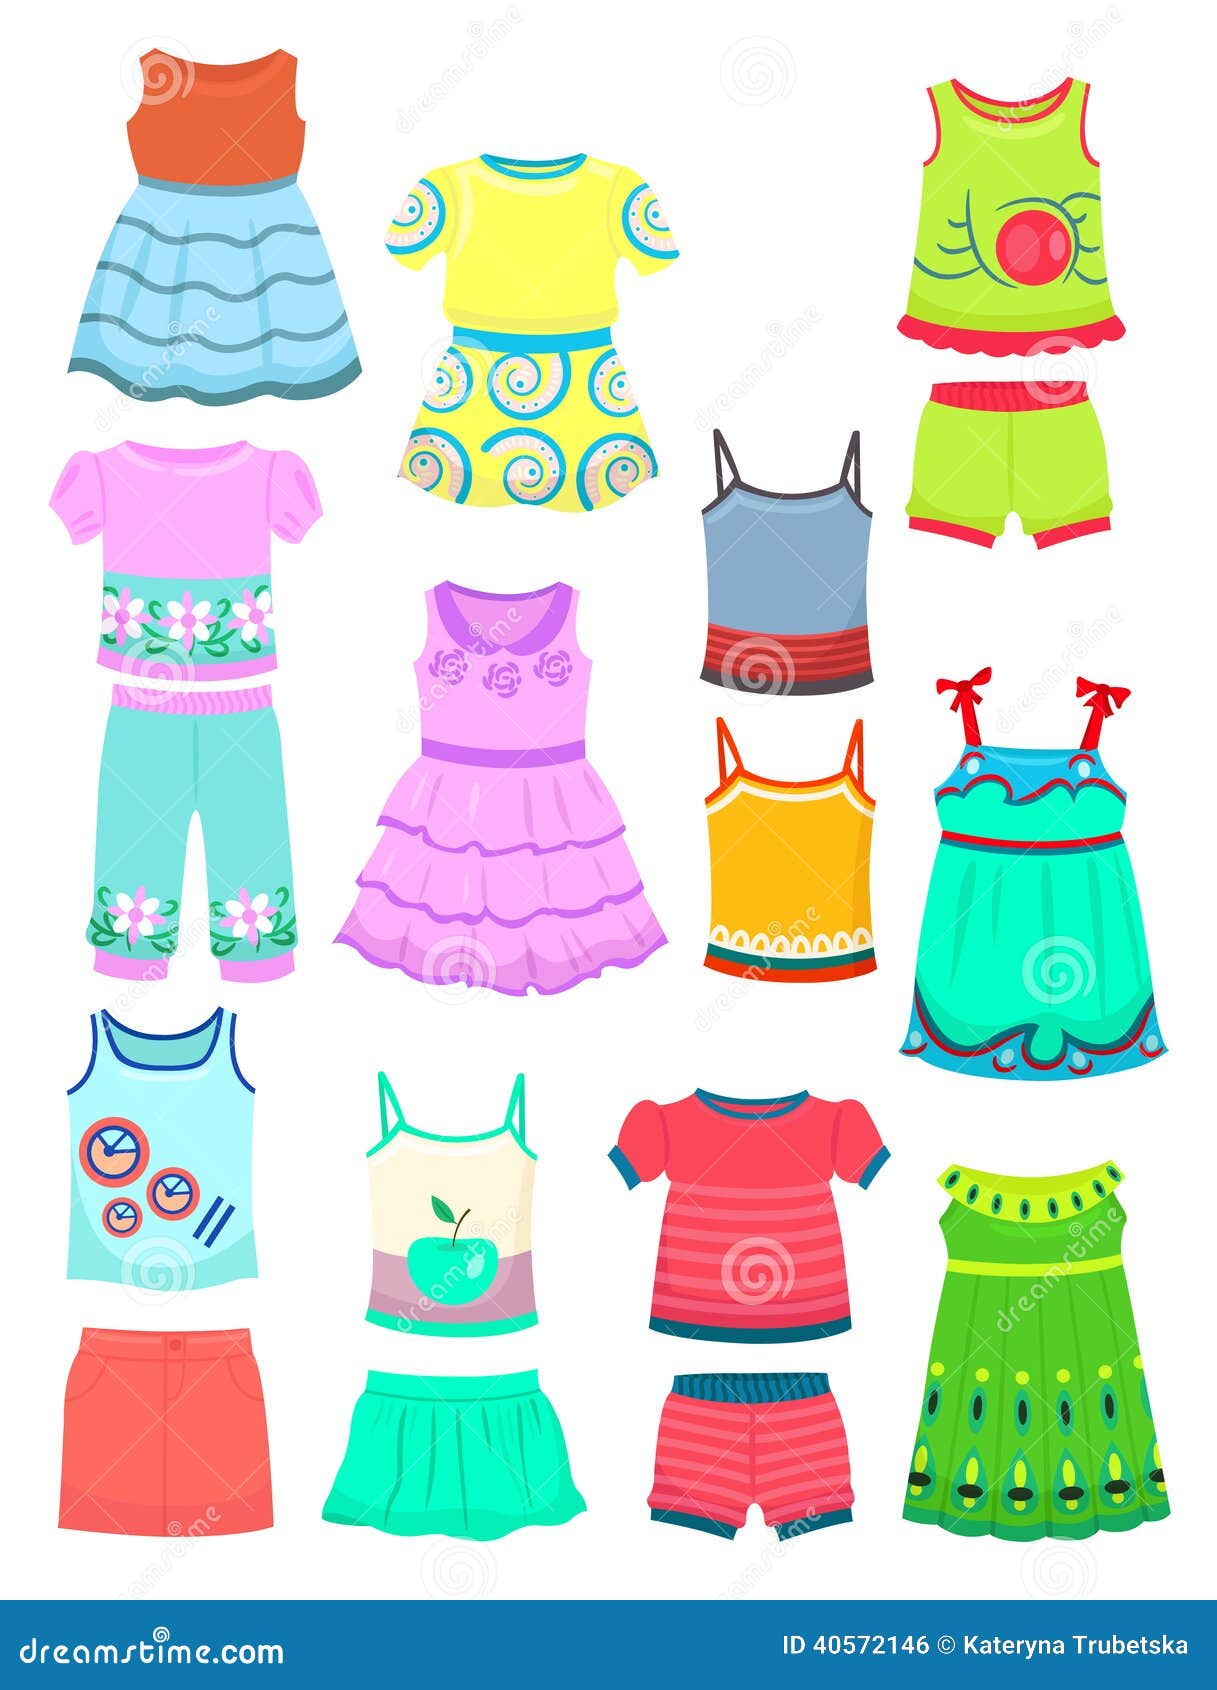 clipart of summer clothes - photo #24